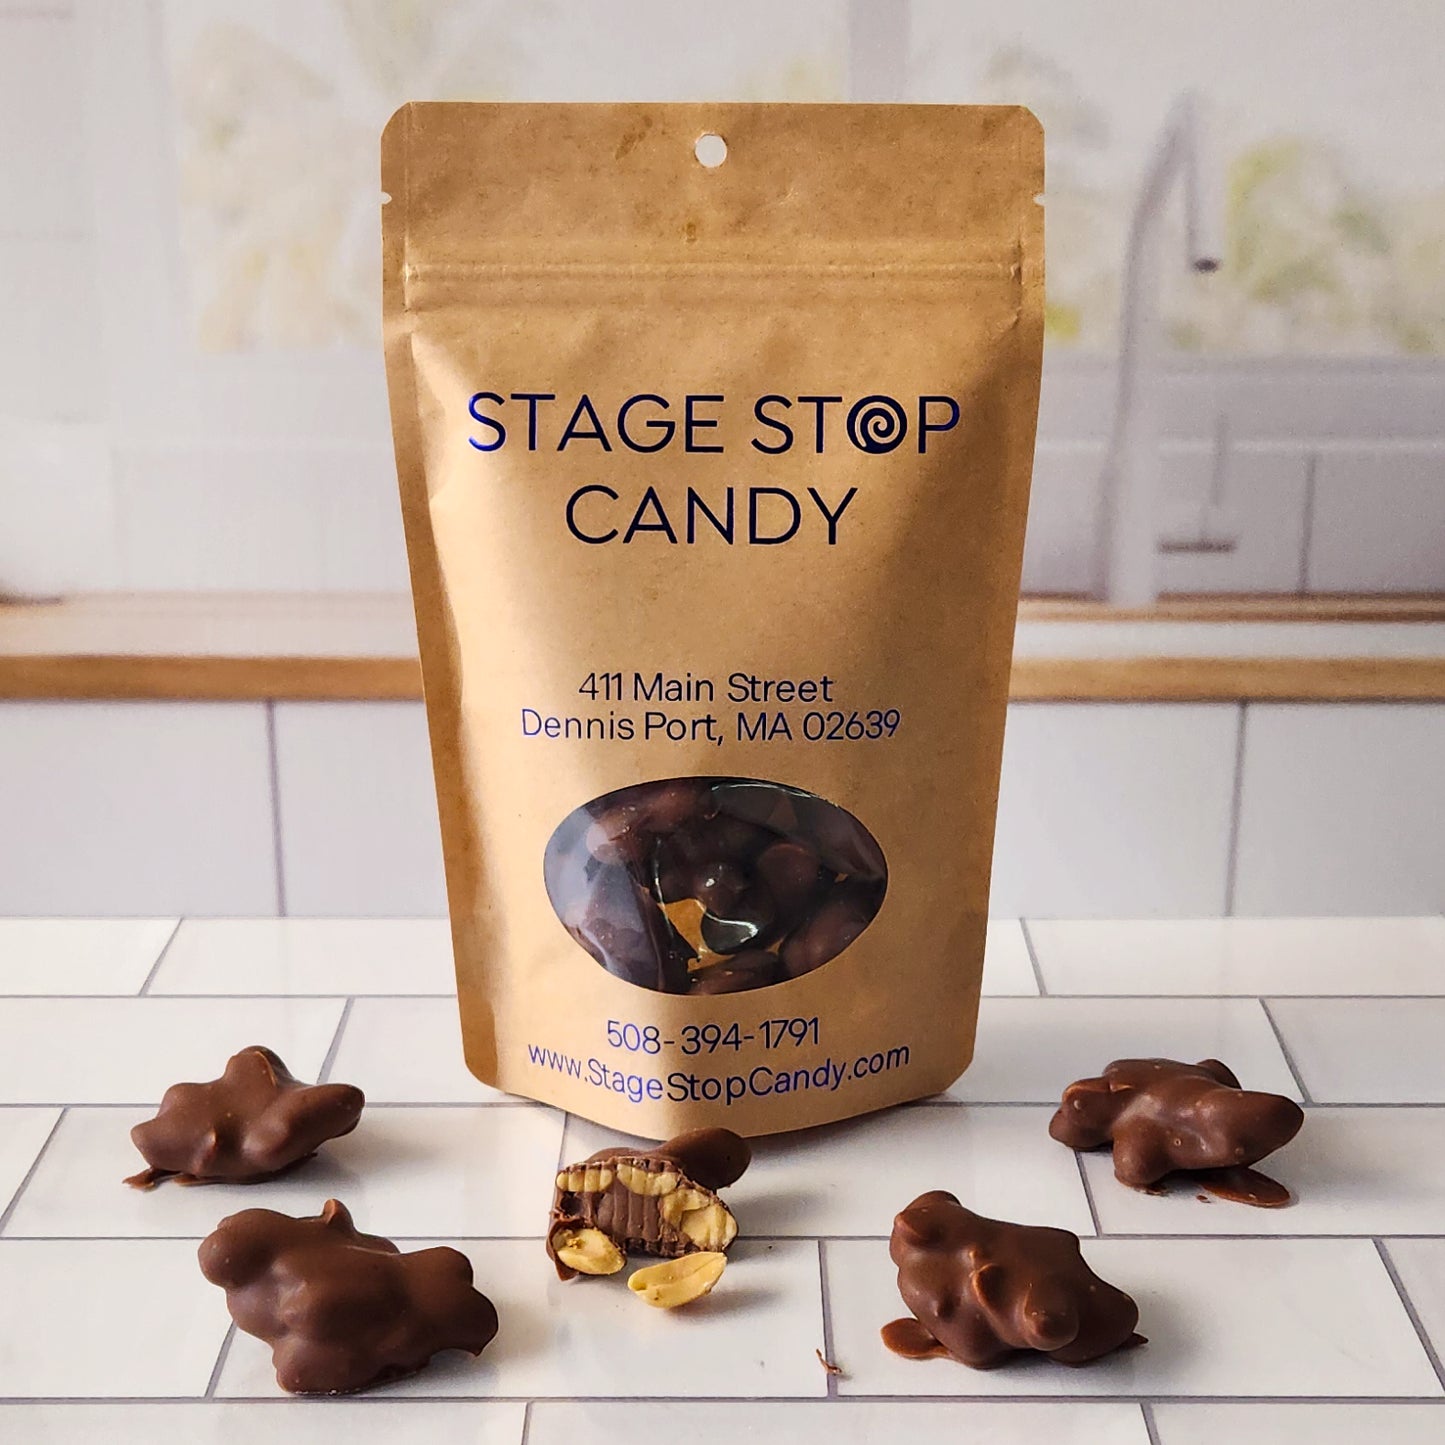 Savor the delightful combination of crunchy peanuts and creamy milk chocolate in our Milk Chocolate Peanut Clusters. Each 6-ounce bag is perfect for snacking, sharing, or gifting.